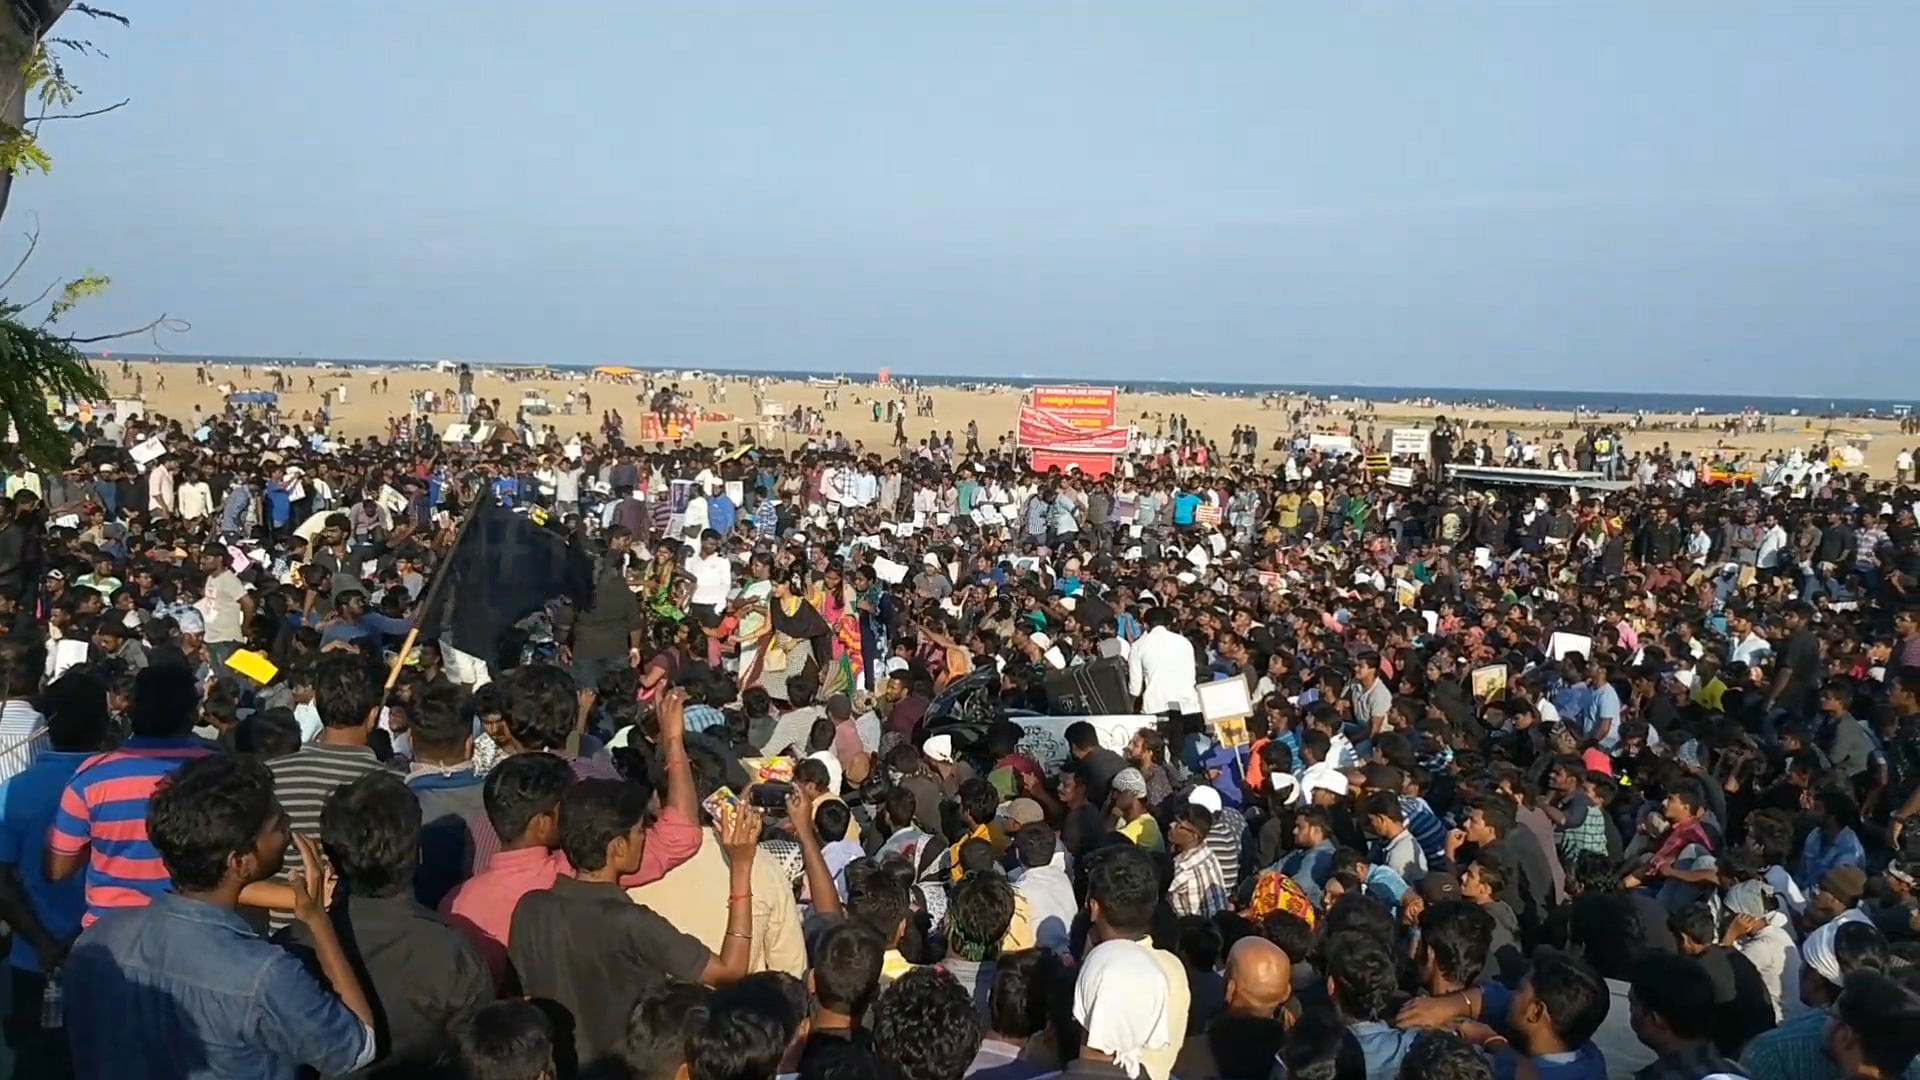 A sea of people can be seen in this picture, thousands camping on the Marina beach in Chennai in support of removal of the ban on conducting Jallikattu. (Photo: The Quint)